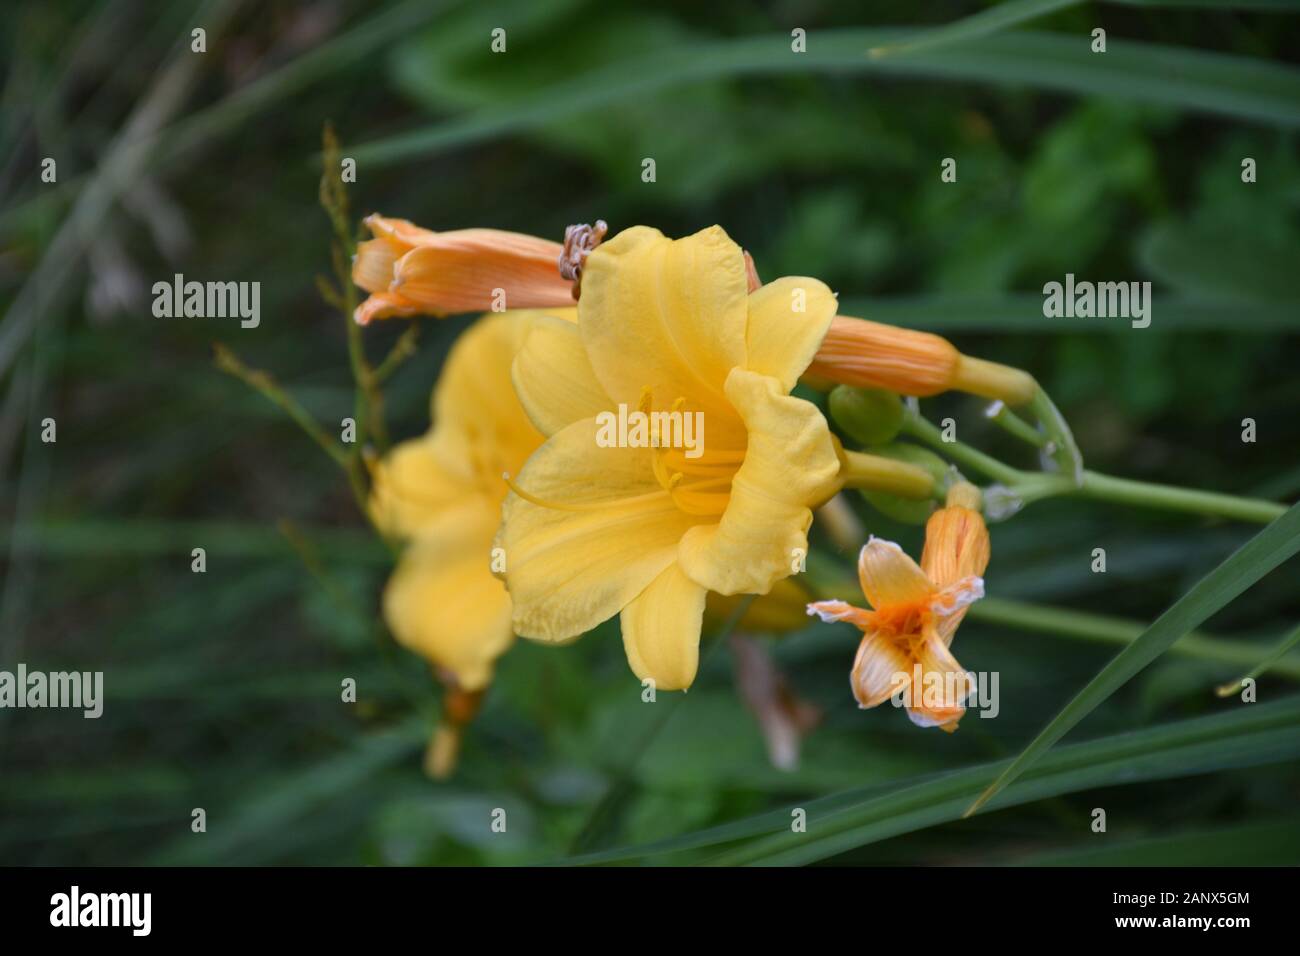 Pretty yellow daylily flower blossom with other buds ready to bloom. Stock Photo